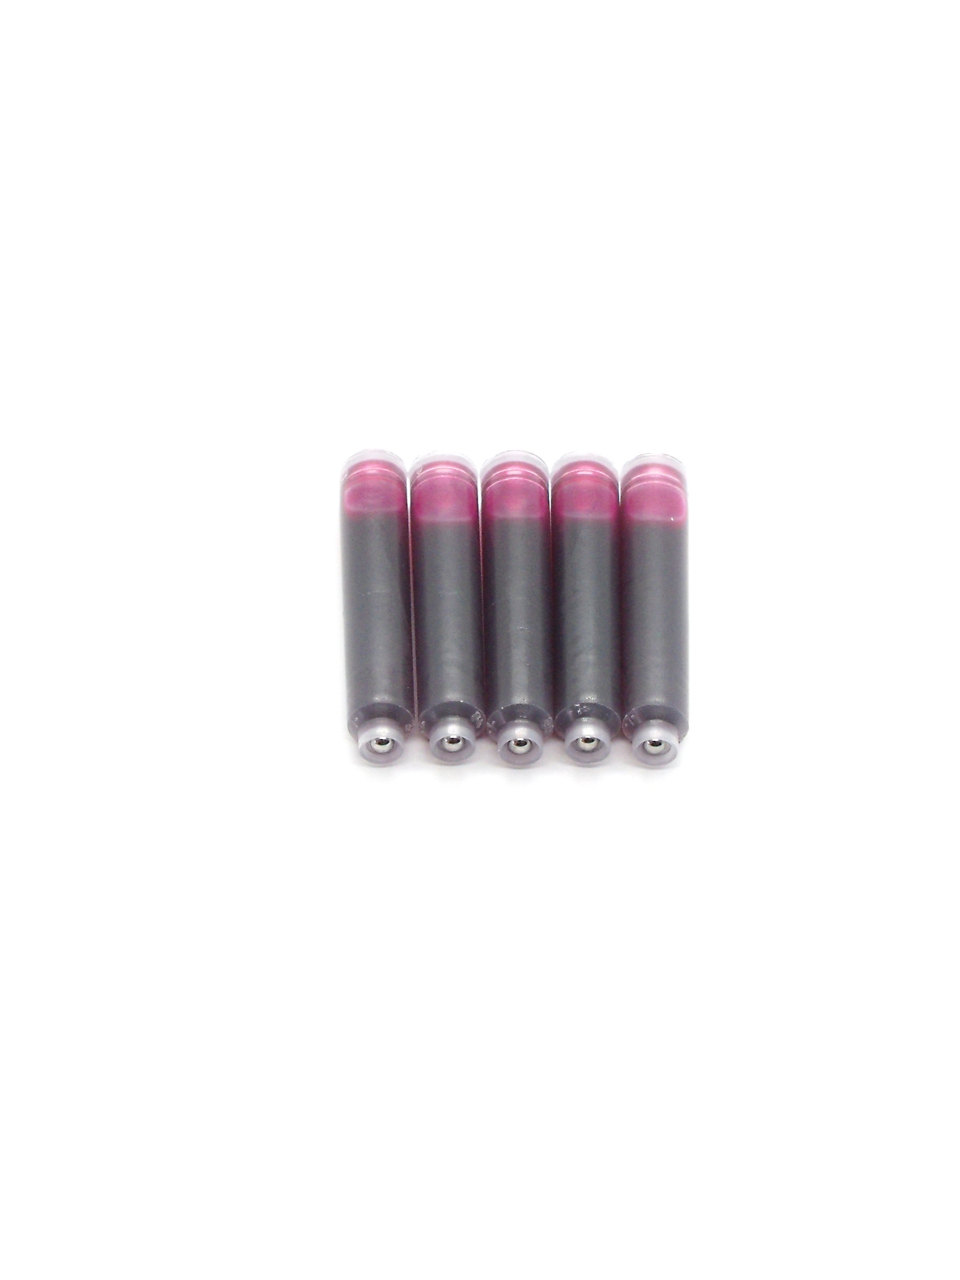 Top Ink Cartridges For Duke Fountain Pens (Pink)